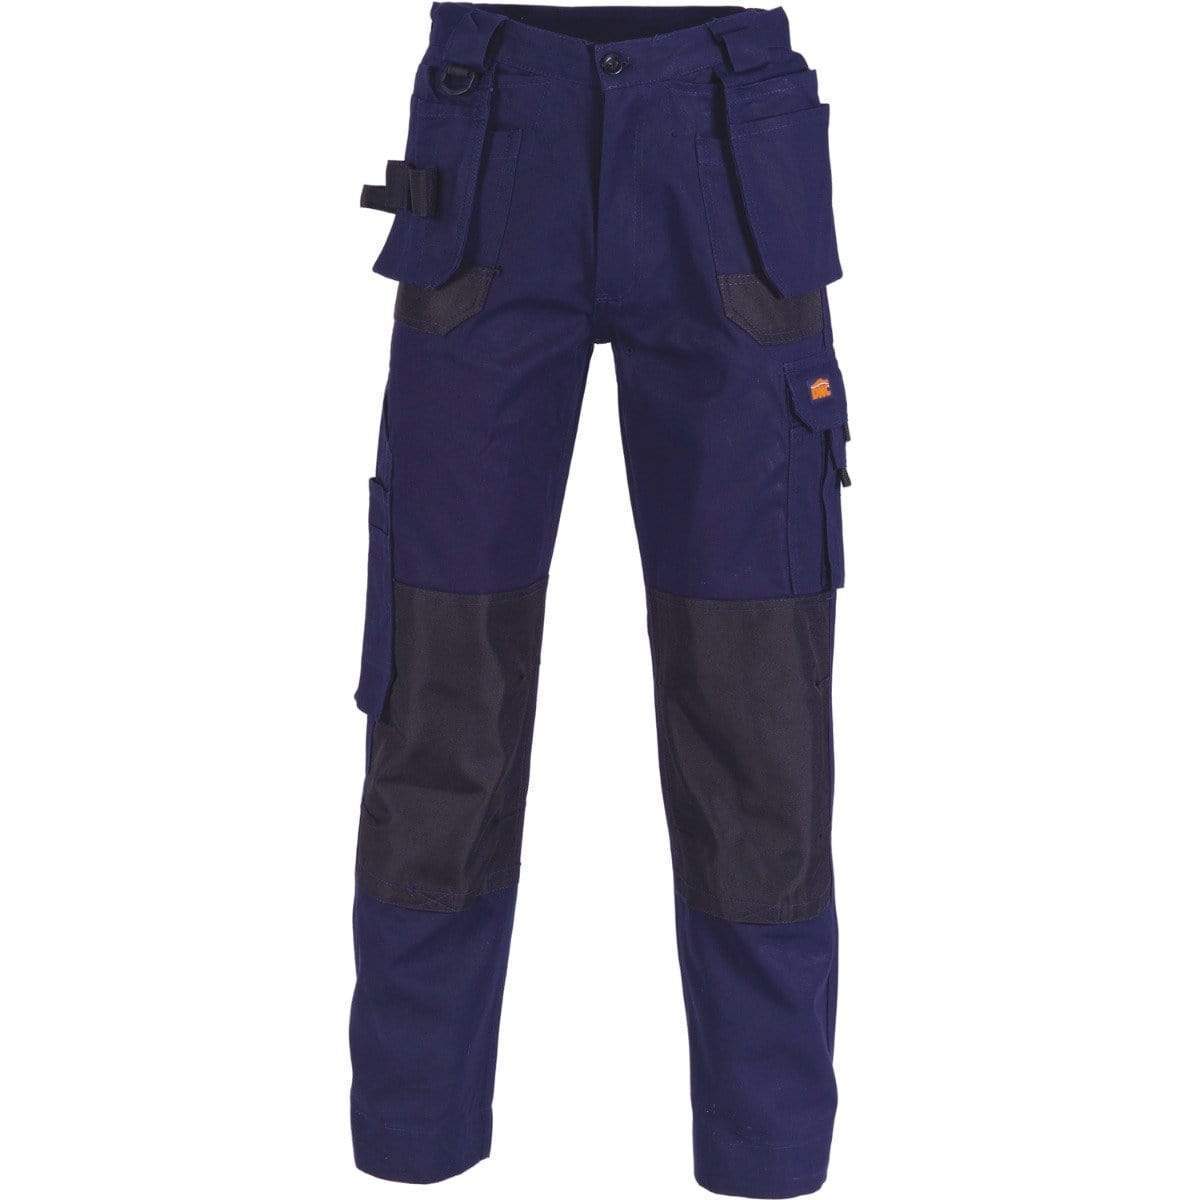 Dnc Workwear Duratex Cotton Duck Weave Tradies Cargo Pants With Twin Holster Tool Pocket - Knee Pads Not Included - 3337 Work Wear DNC Workwear Navy 72R 